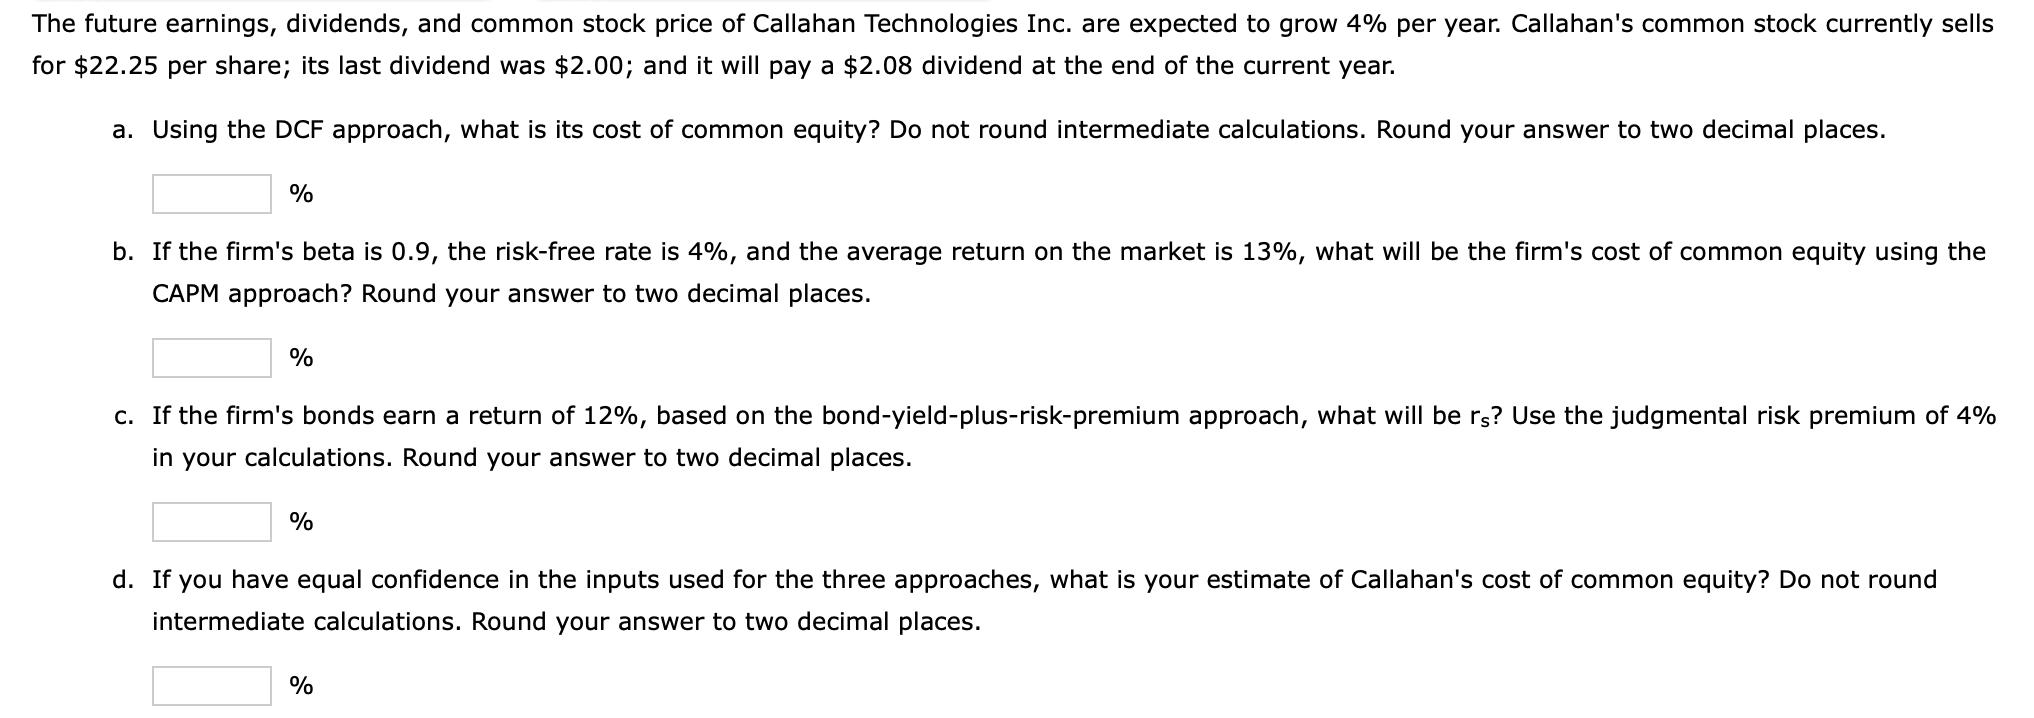 he future earnings, dividends, and common stock price of Callahan Technologies Inc. are expected to grow ( 4 % ) per year.